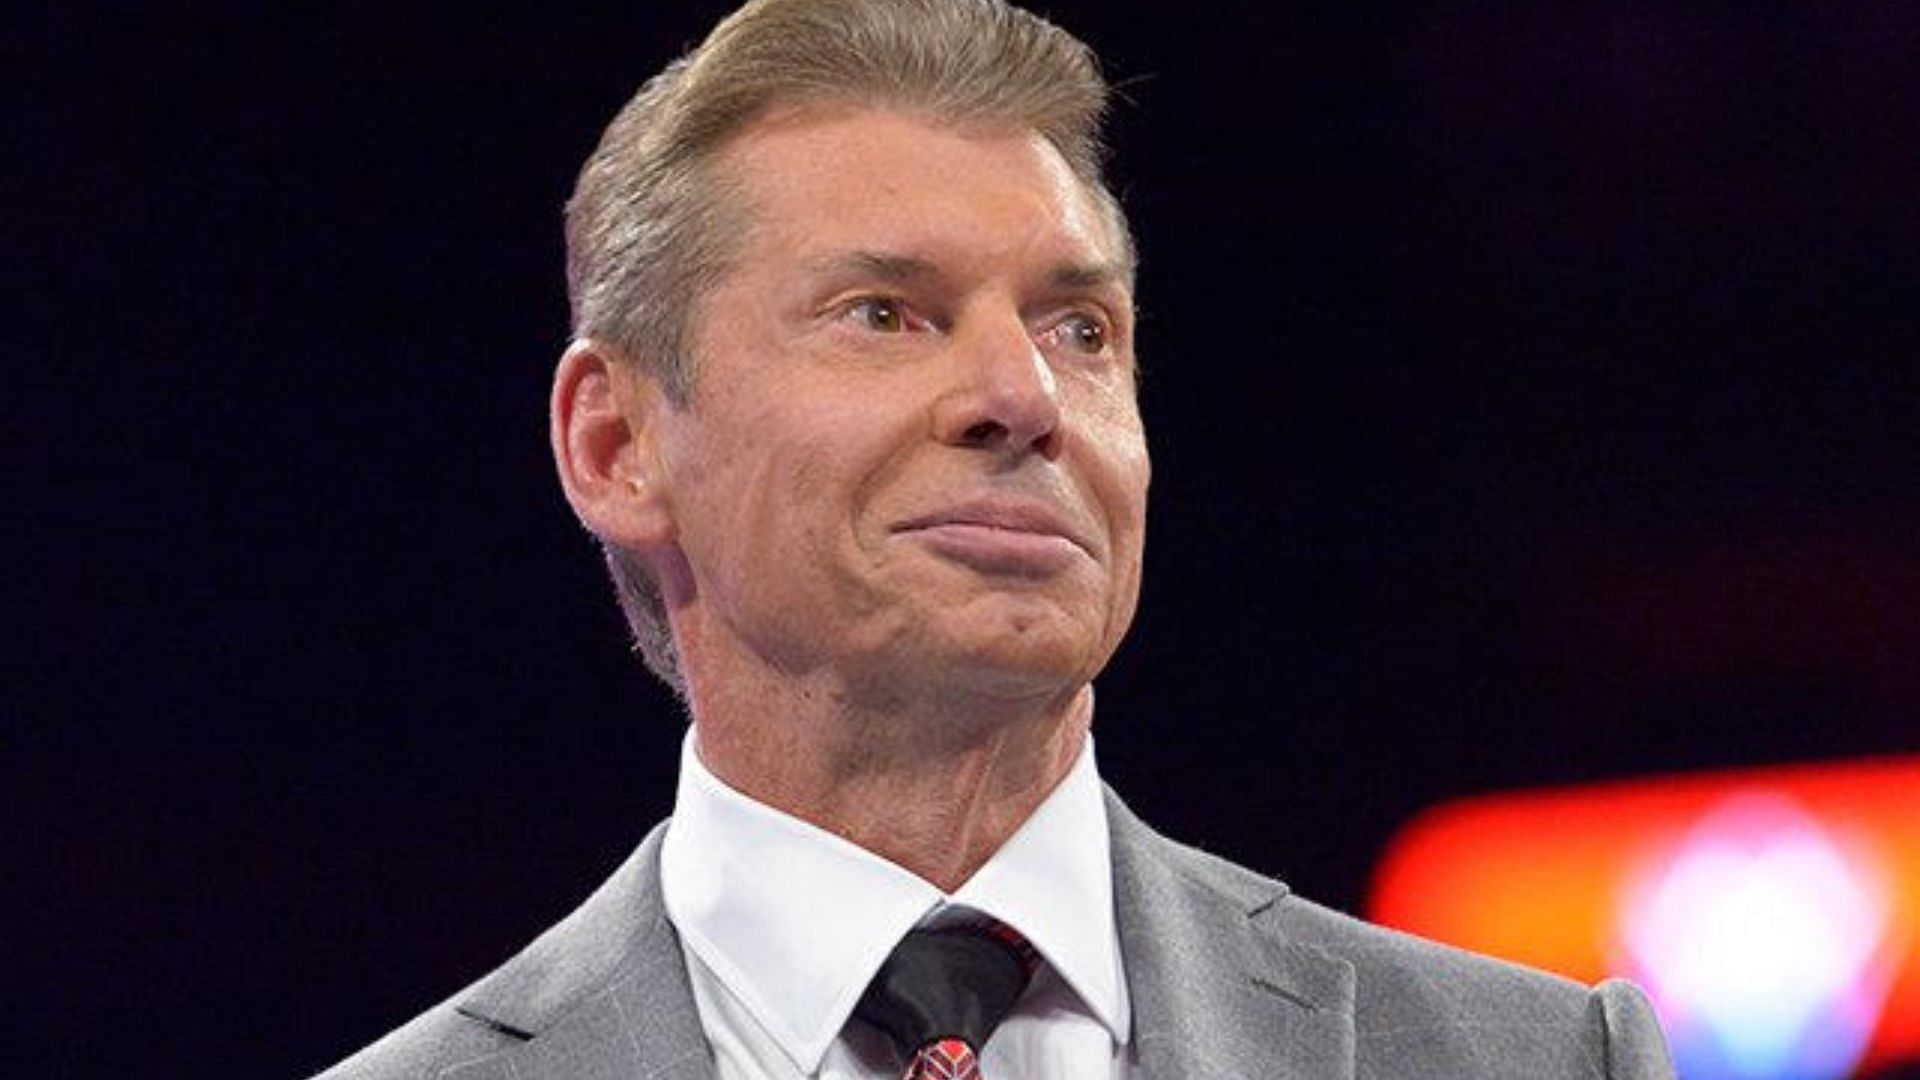 Vince McMahon is the man behind World Wrestling Entertainment